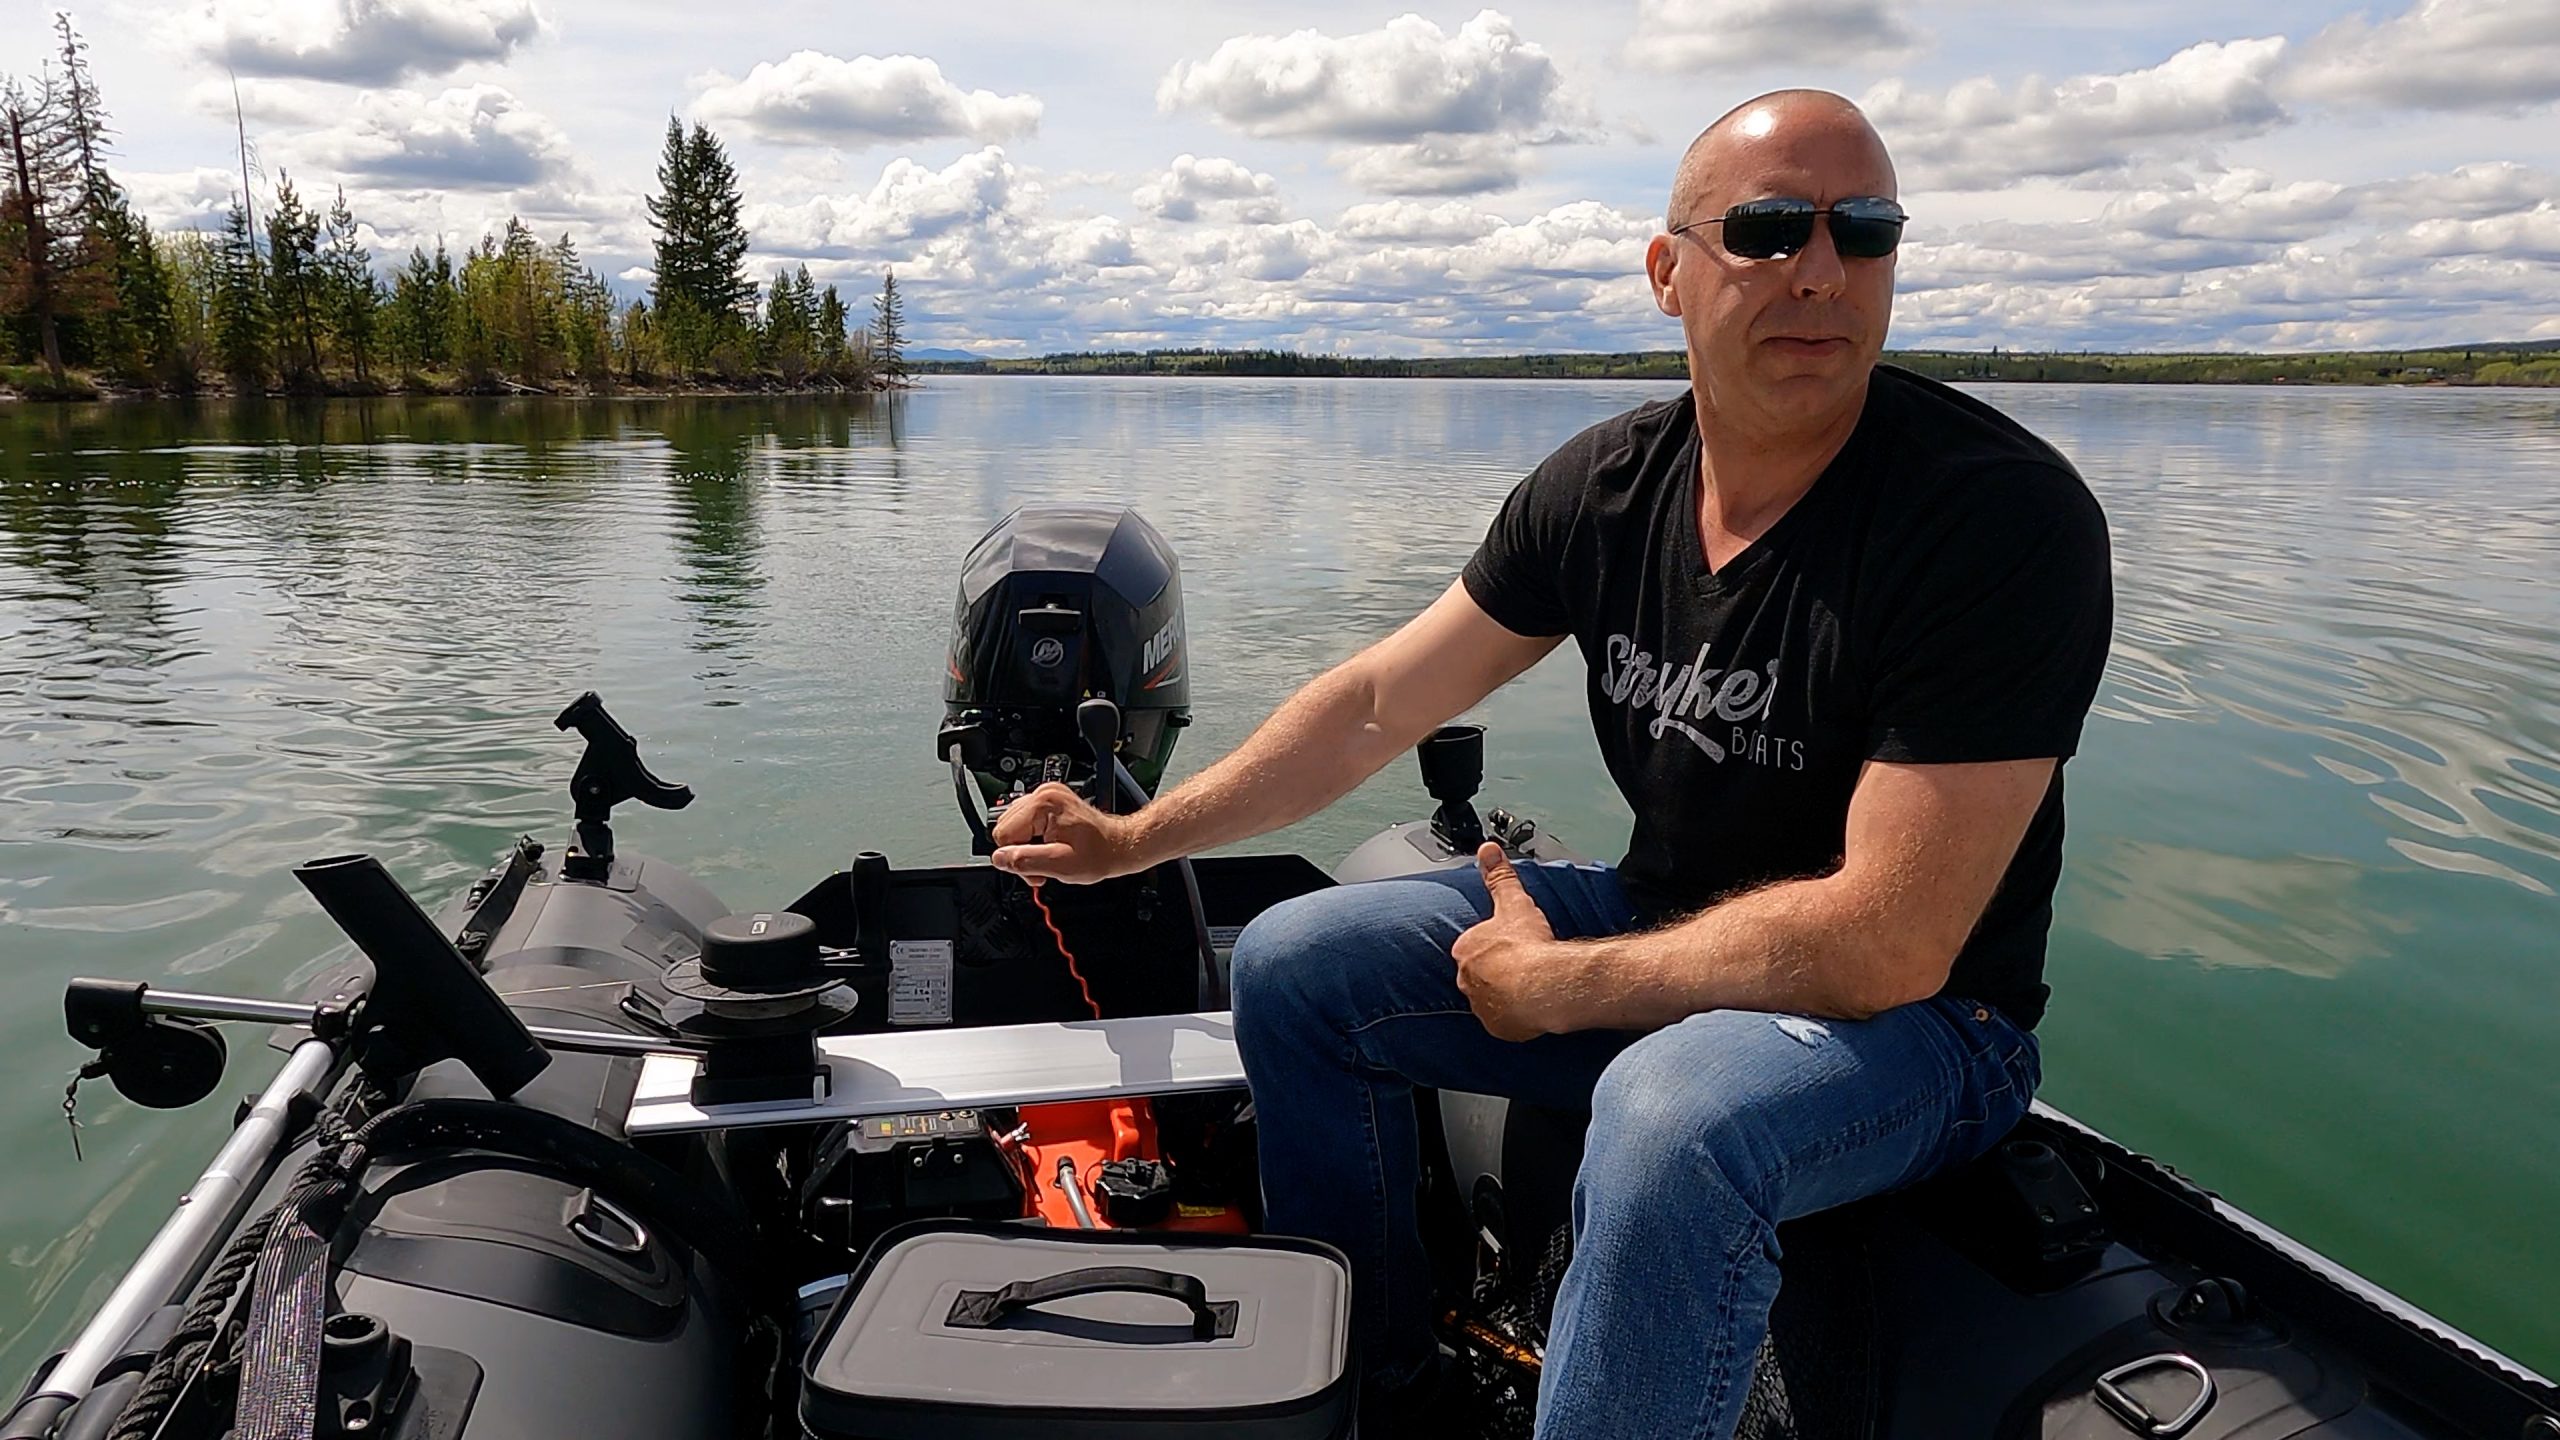 Choose Between the Prop Saver & Jet Outboards? - Stryker Boats